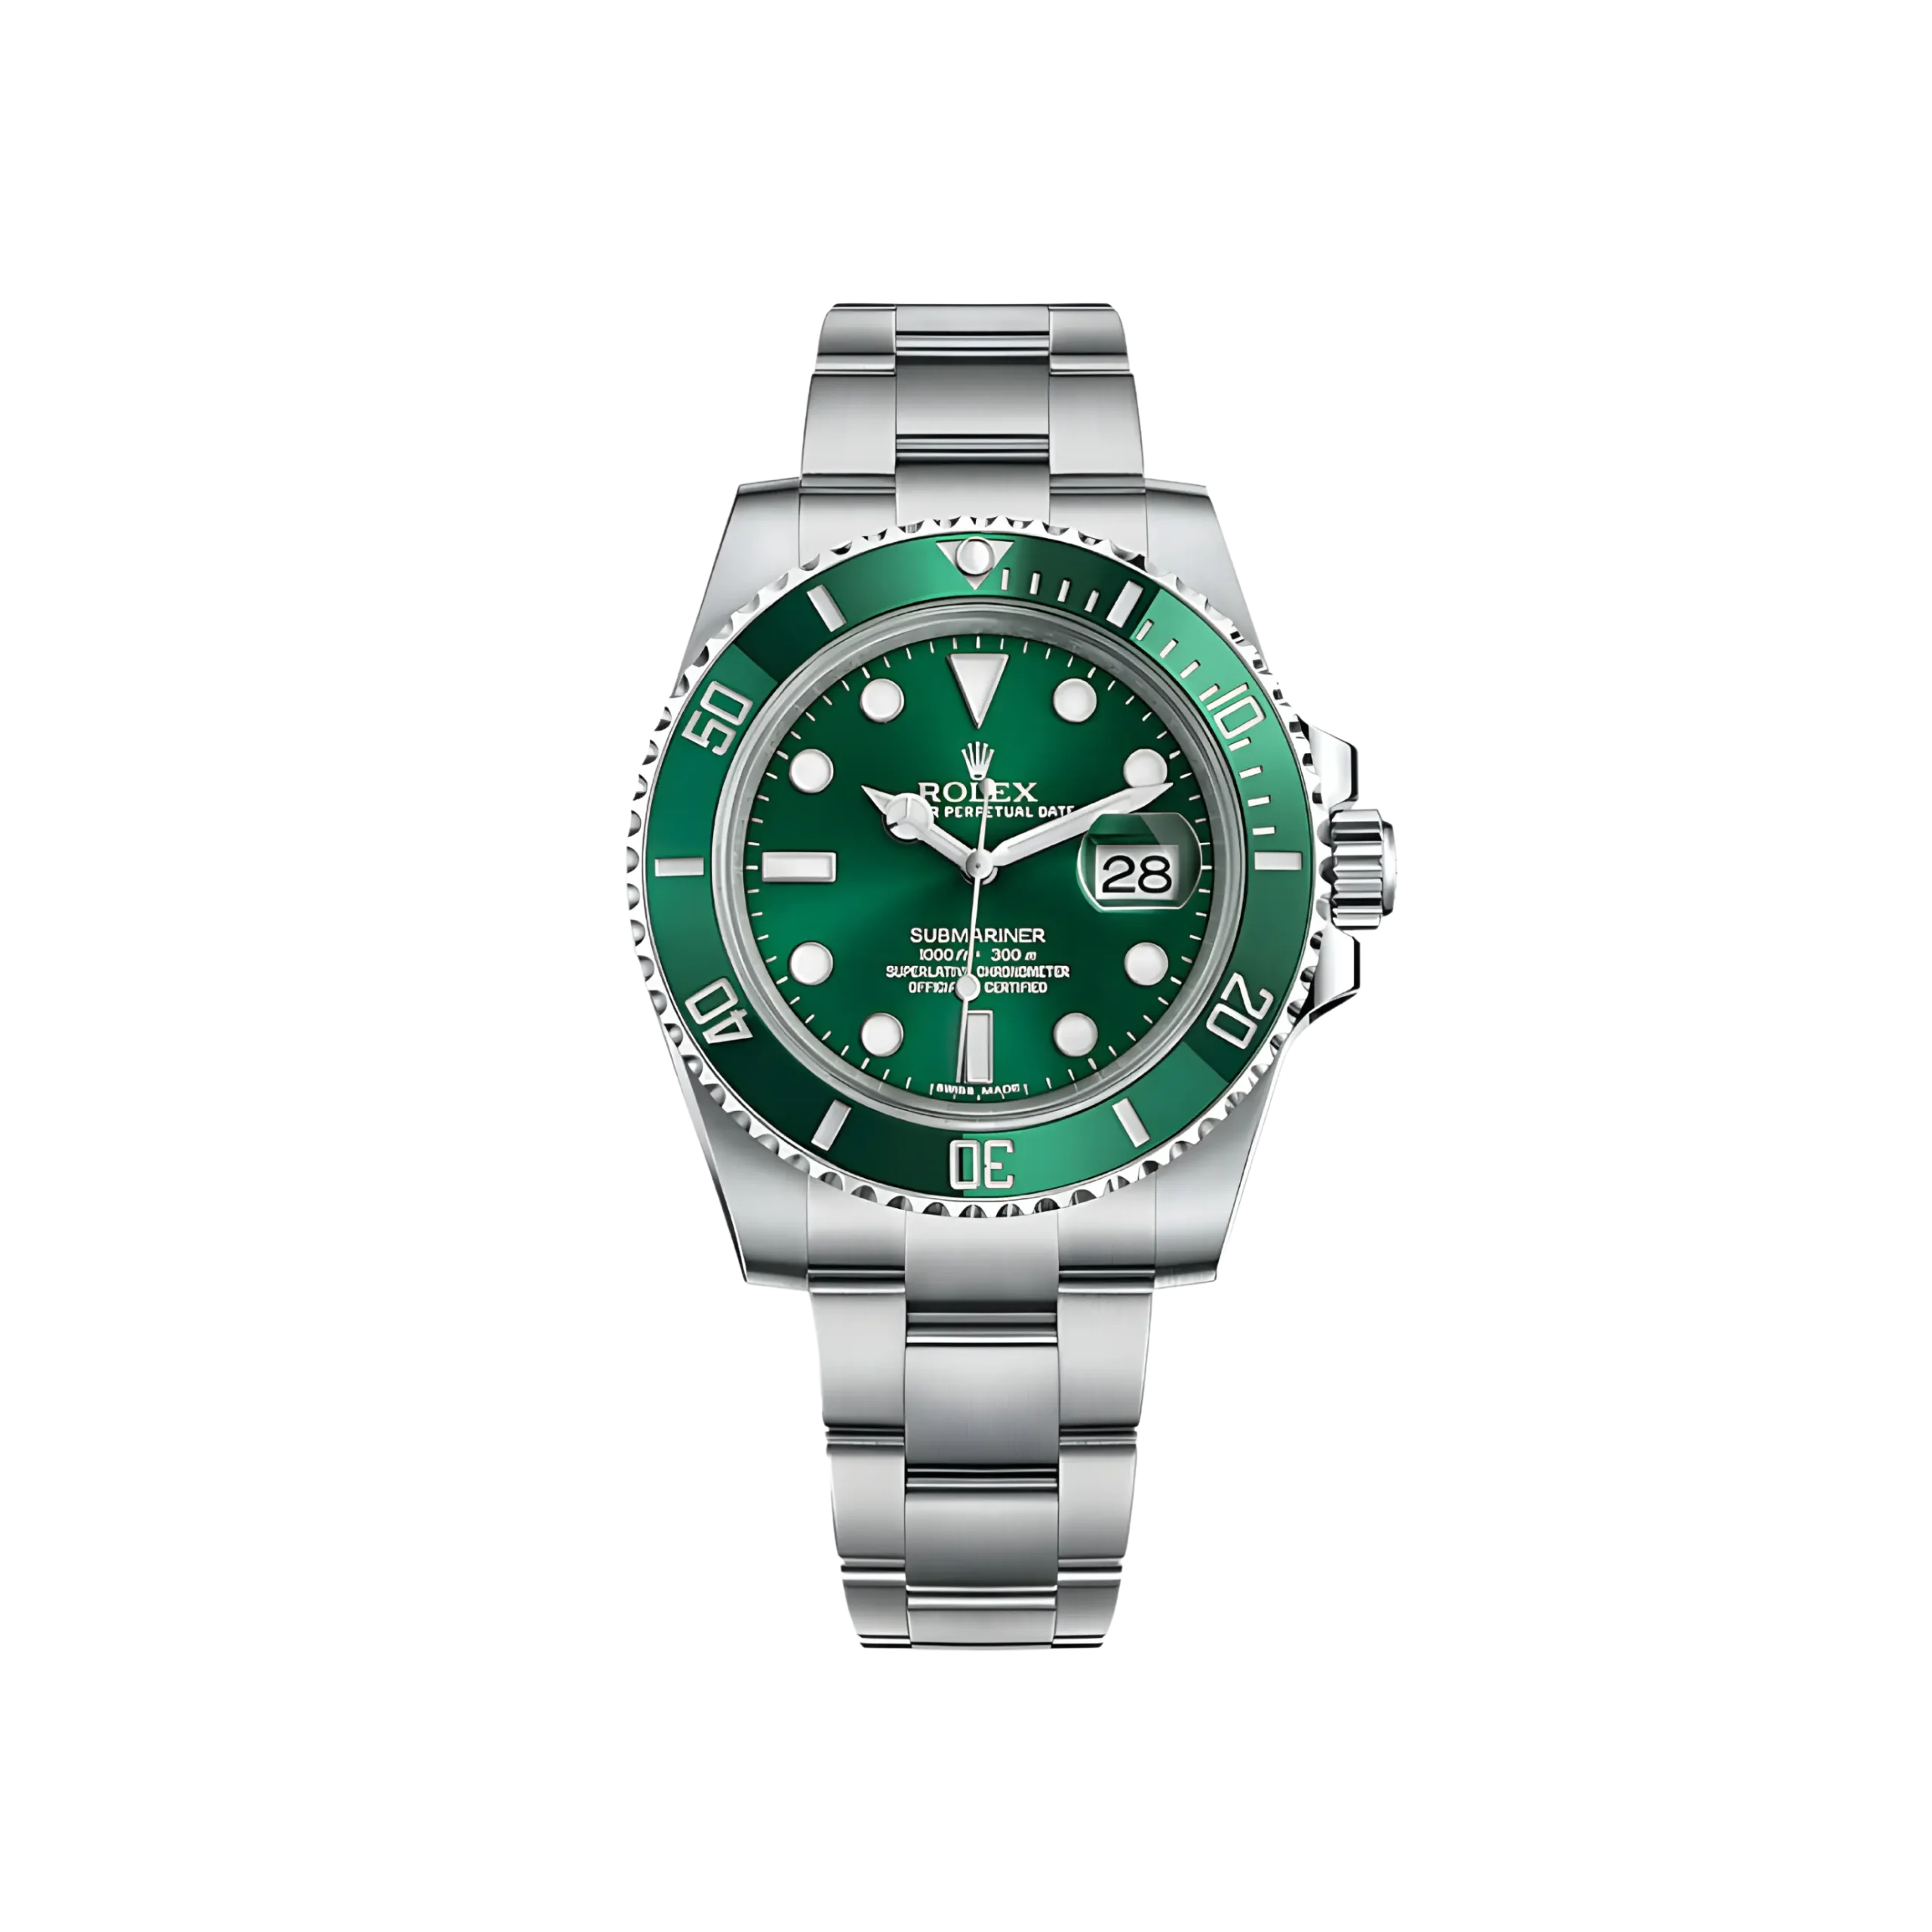 Rolex Submariner Hulk Green - 116610 LV - 40mm Stainless Steel Case - Oyster Bracelet - Automatic Movement - Green Dial - Japanese Craftsmanship - Sapphire Crystal - Timeless Elegance in Every Detail.